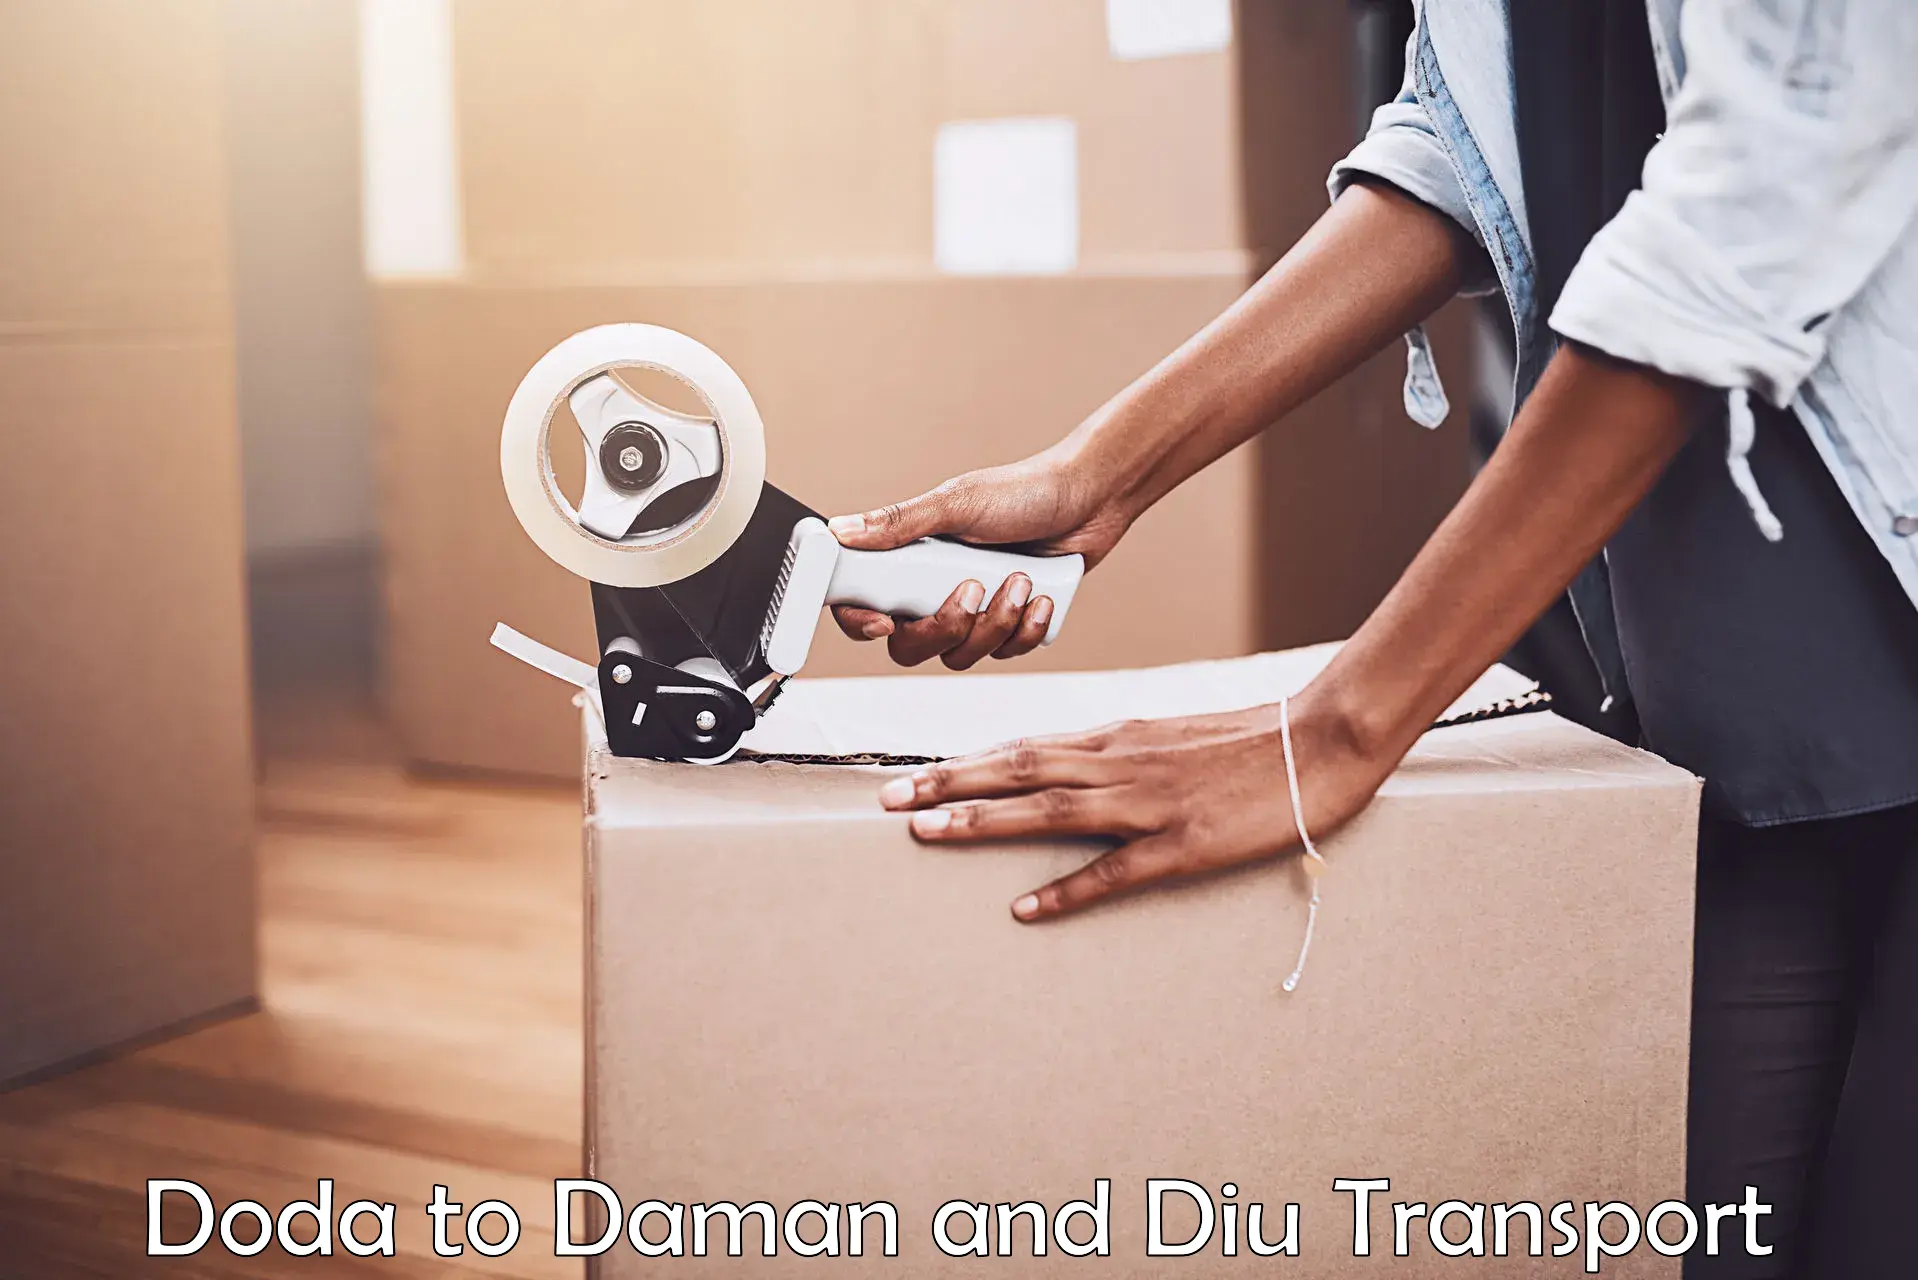 Goods delivery service Doda to Daman and Diu